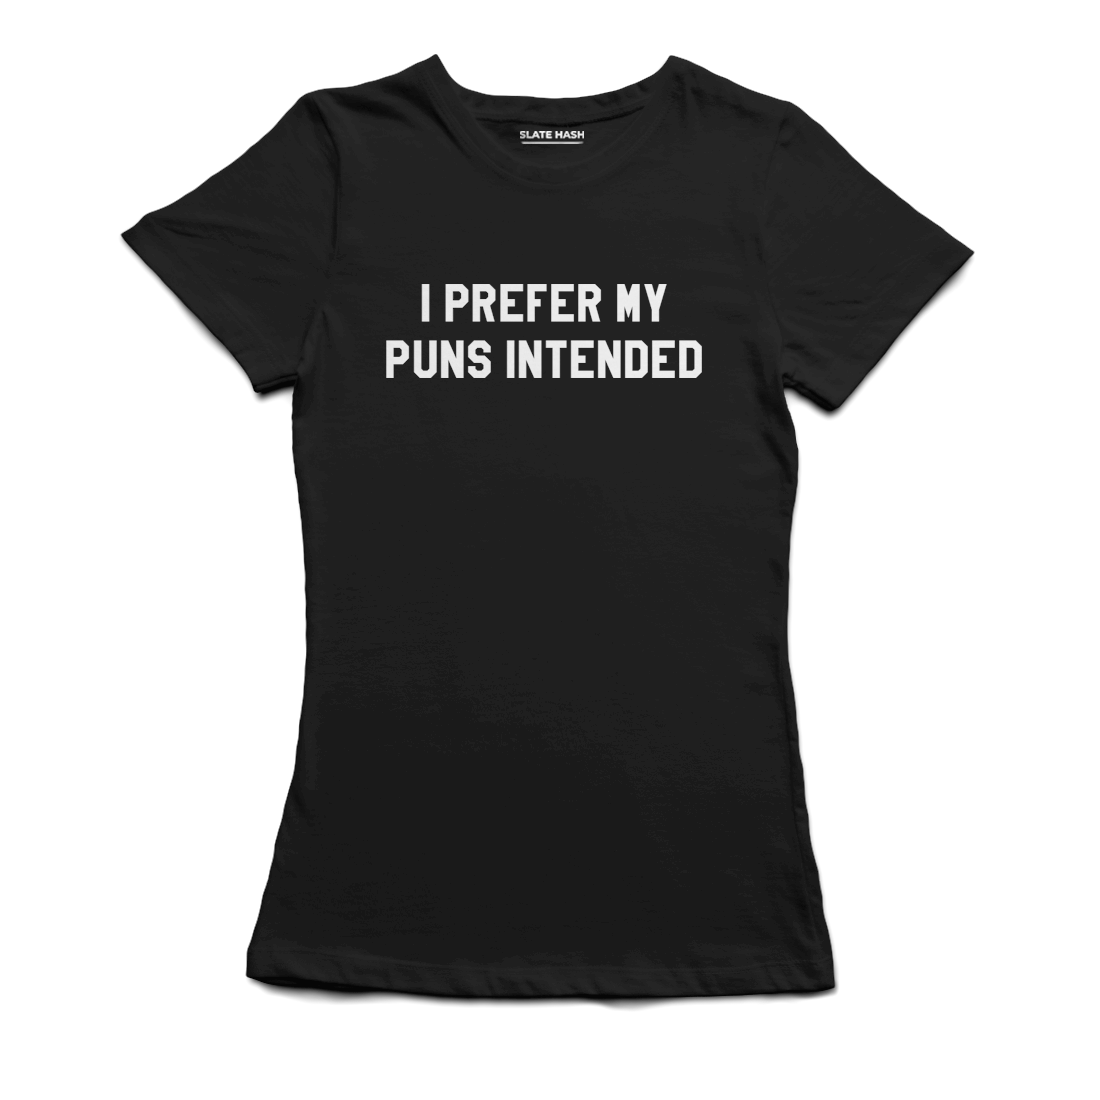 Intended Puns T-Shirt